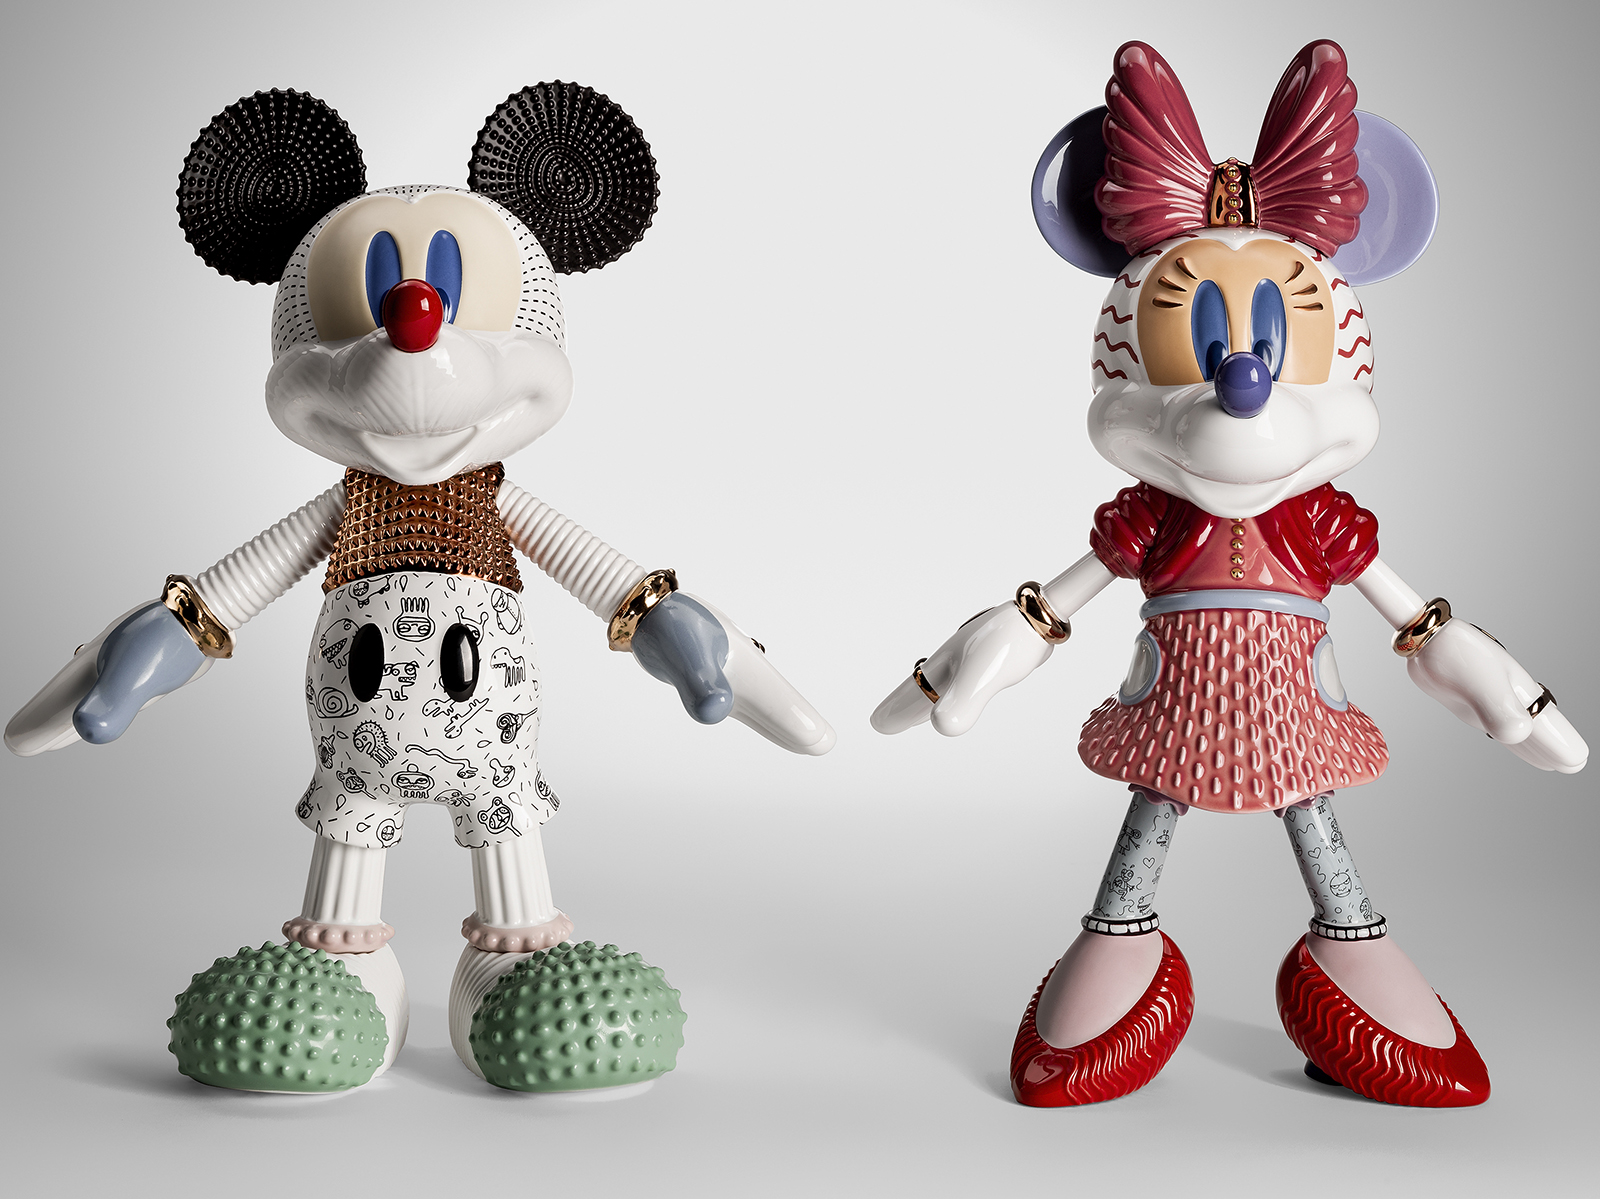 Ceramic figurines of Mickey and Minnie Mouse in street style fashion and bright color